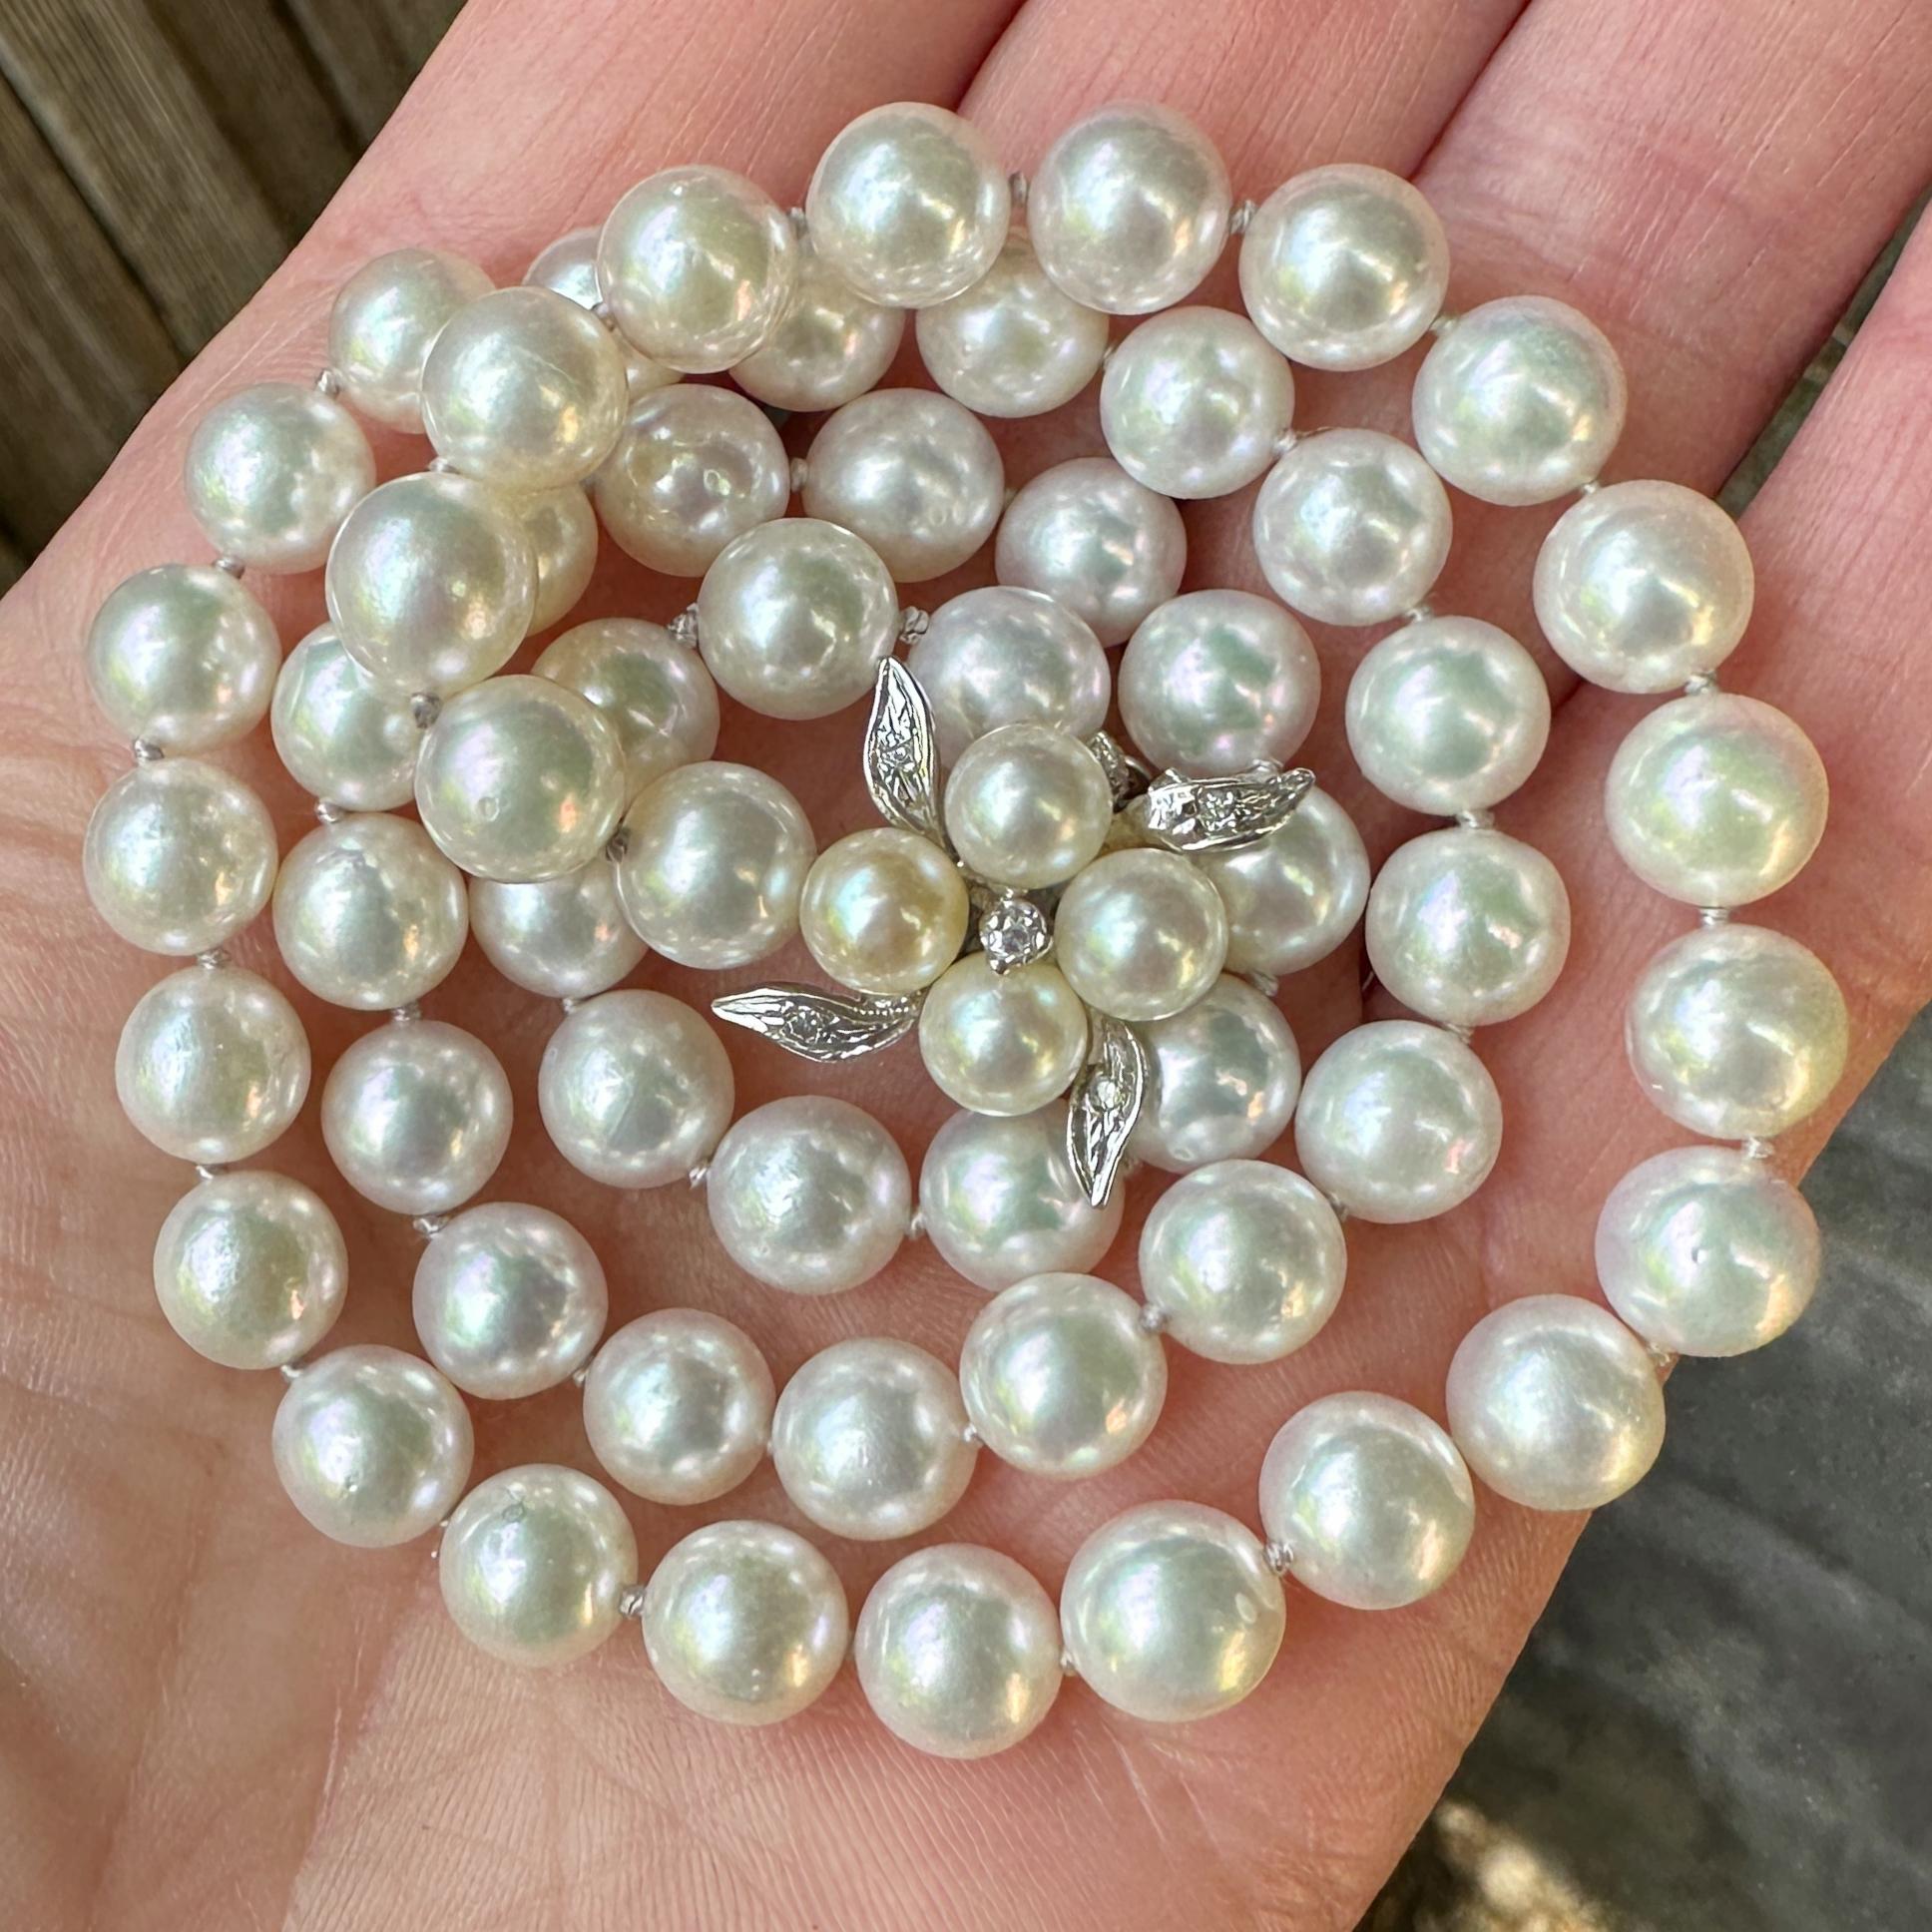 Princess Length 7mm Akoya Pearl Necklace with Vintage White Gold & Diamond Clasp For Sale 2